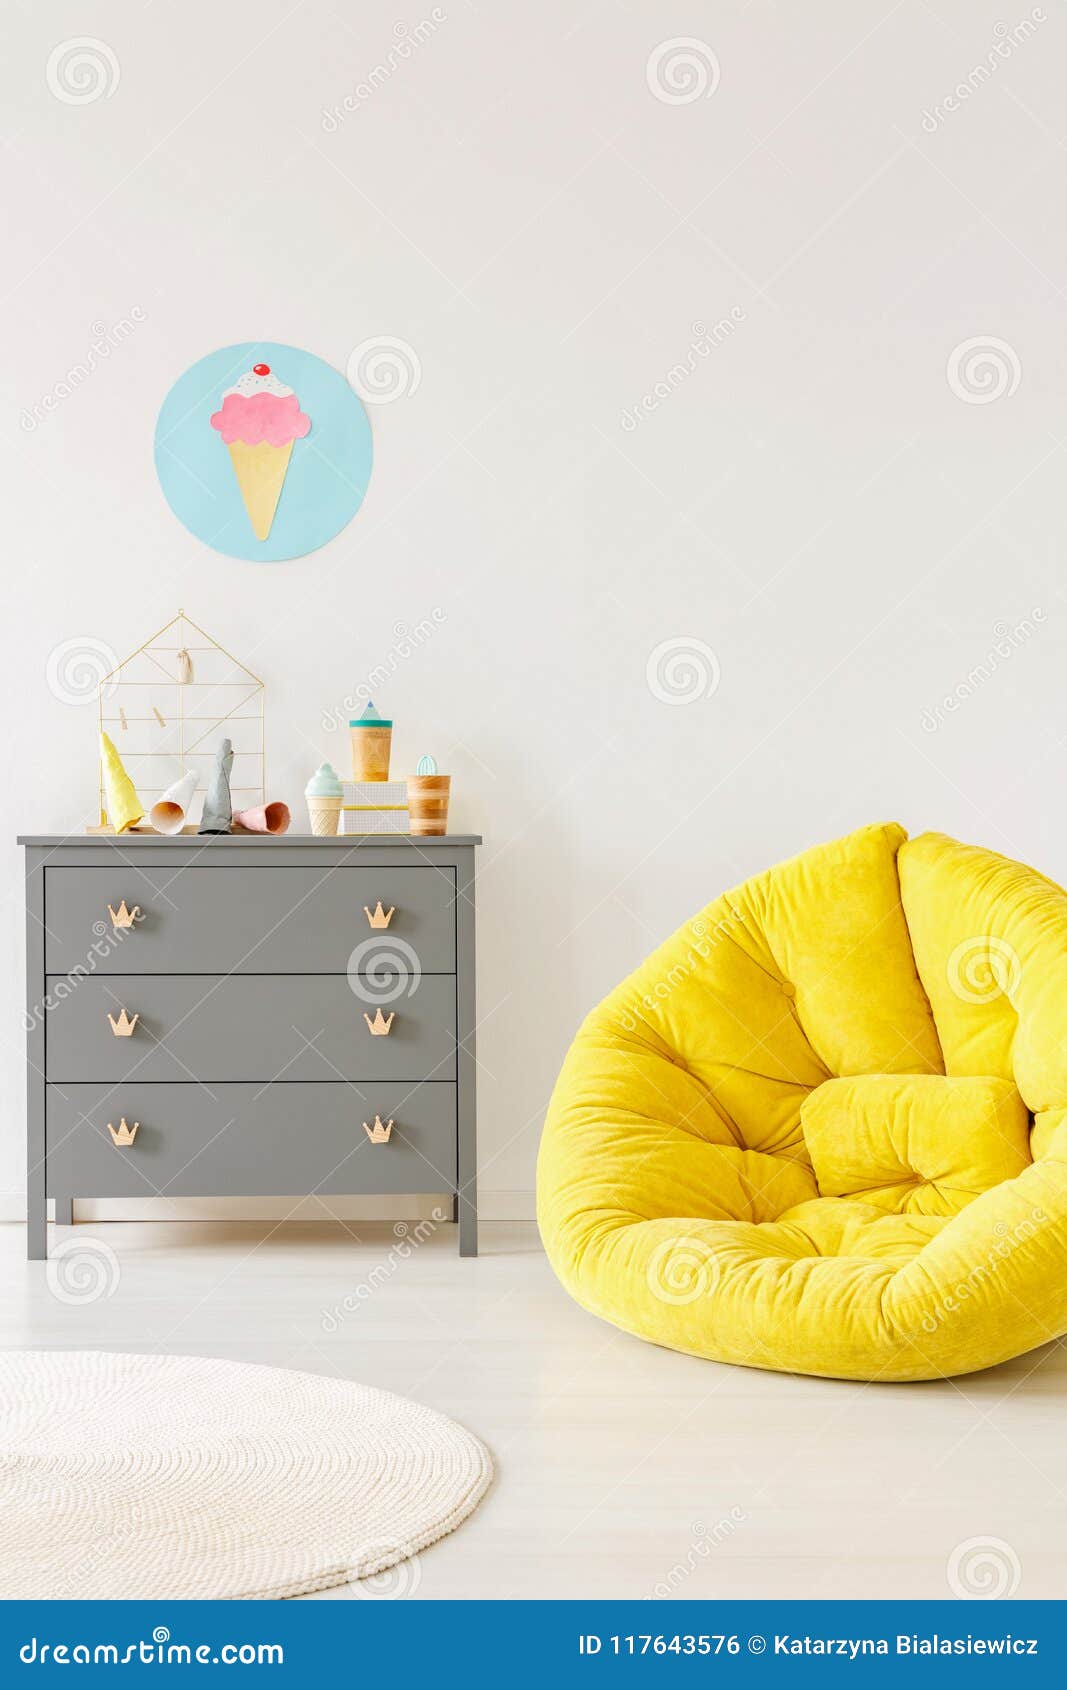 Yellow Pouf Next To A Grey Chest Of Drawers And Ice Cream Poster